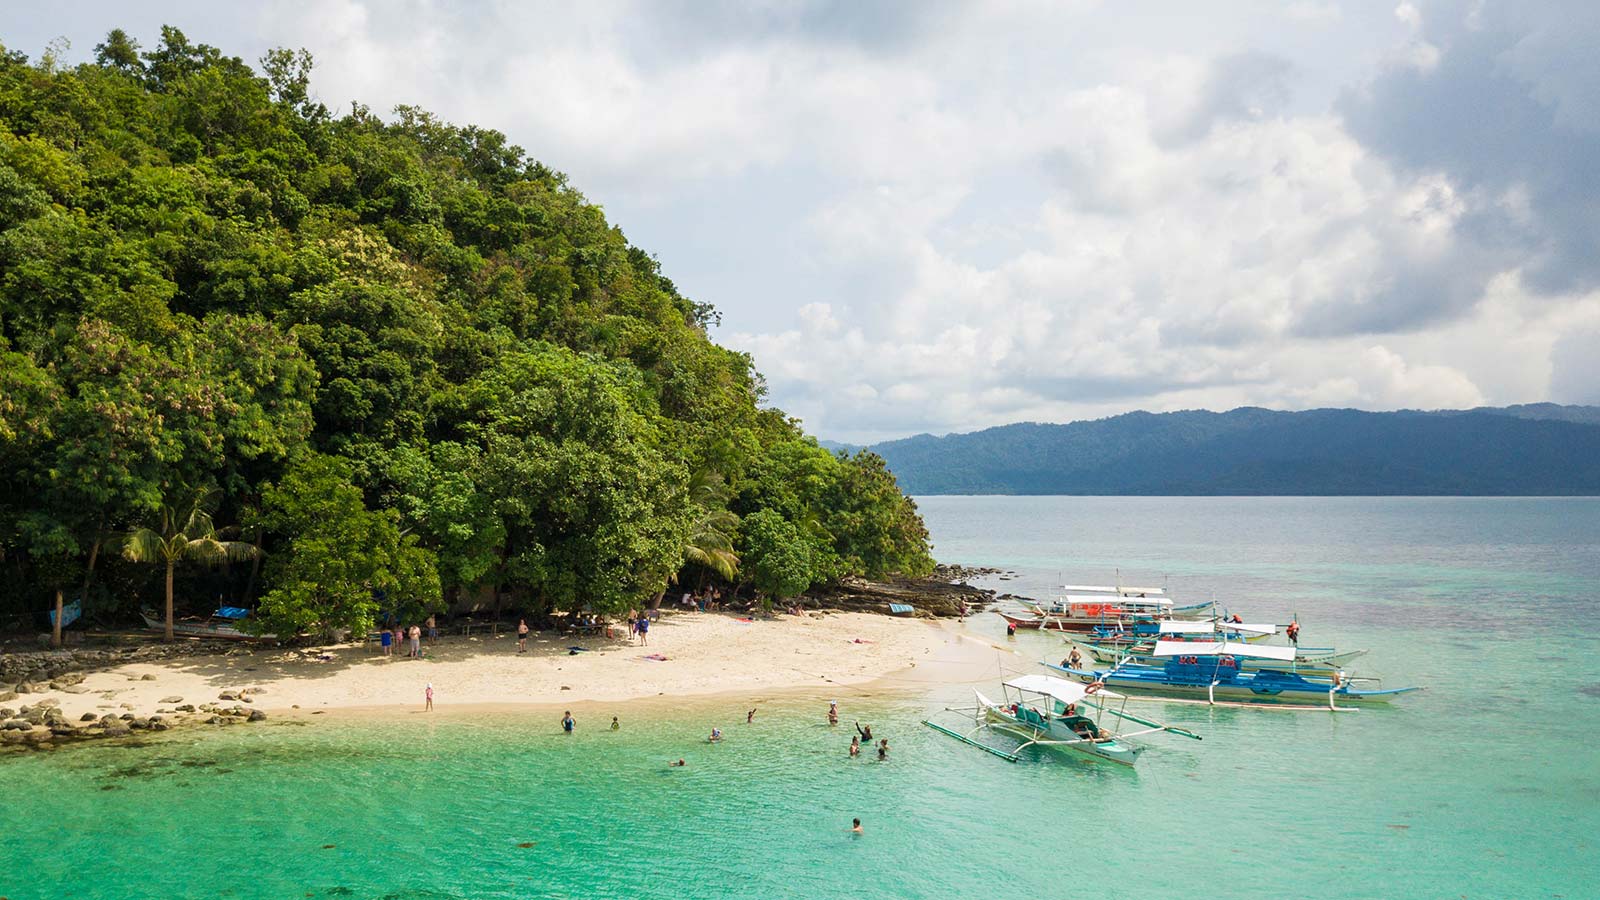 The Philippine Islands are full of beautiful destinations, but there are still a few undiscovered treasured scattered throughout this paradise. San Vicente, located between El Nido and Coron is one of our favorites. Discover all the incredible things to do in San Vicente Palawan for the whole family!